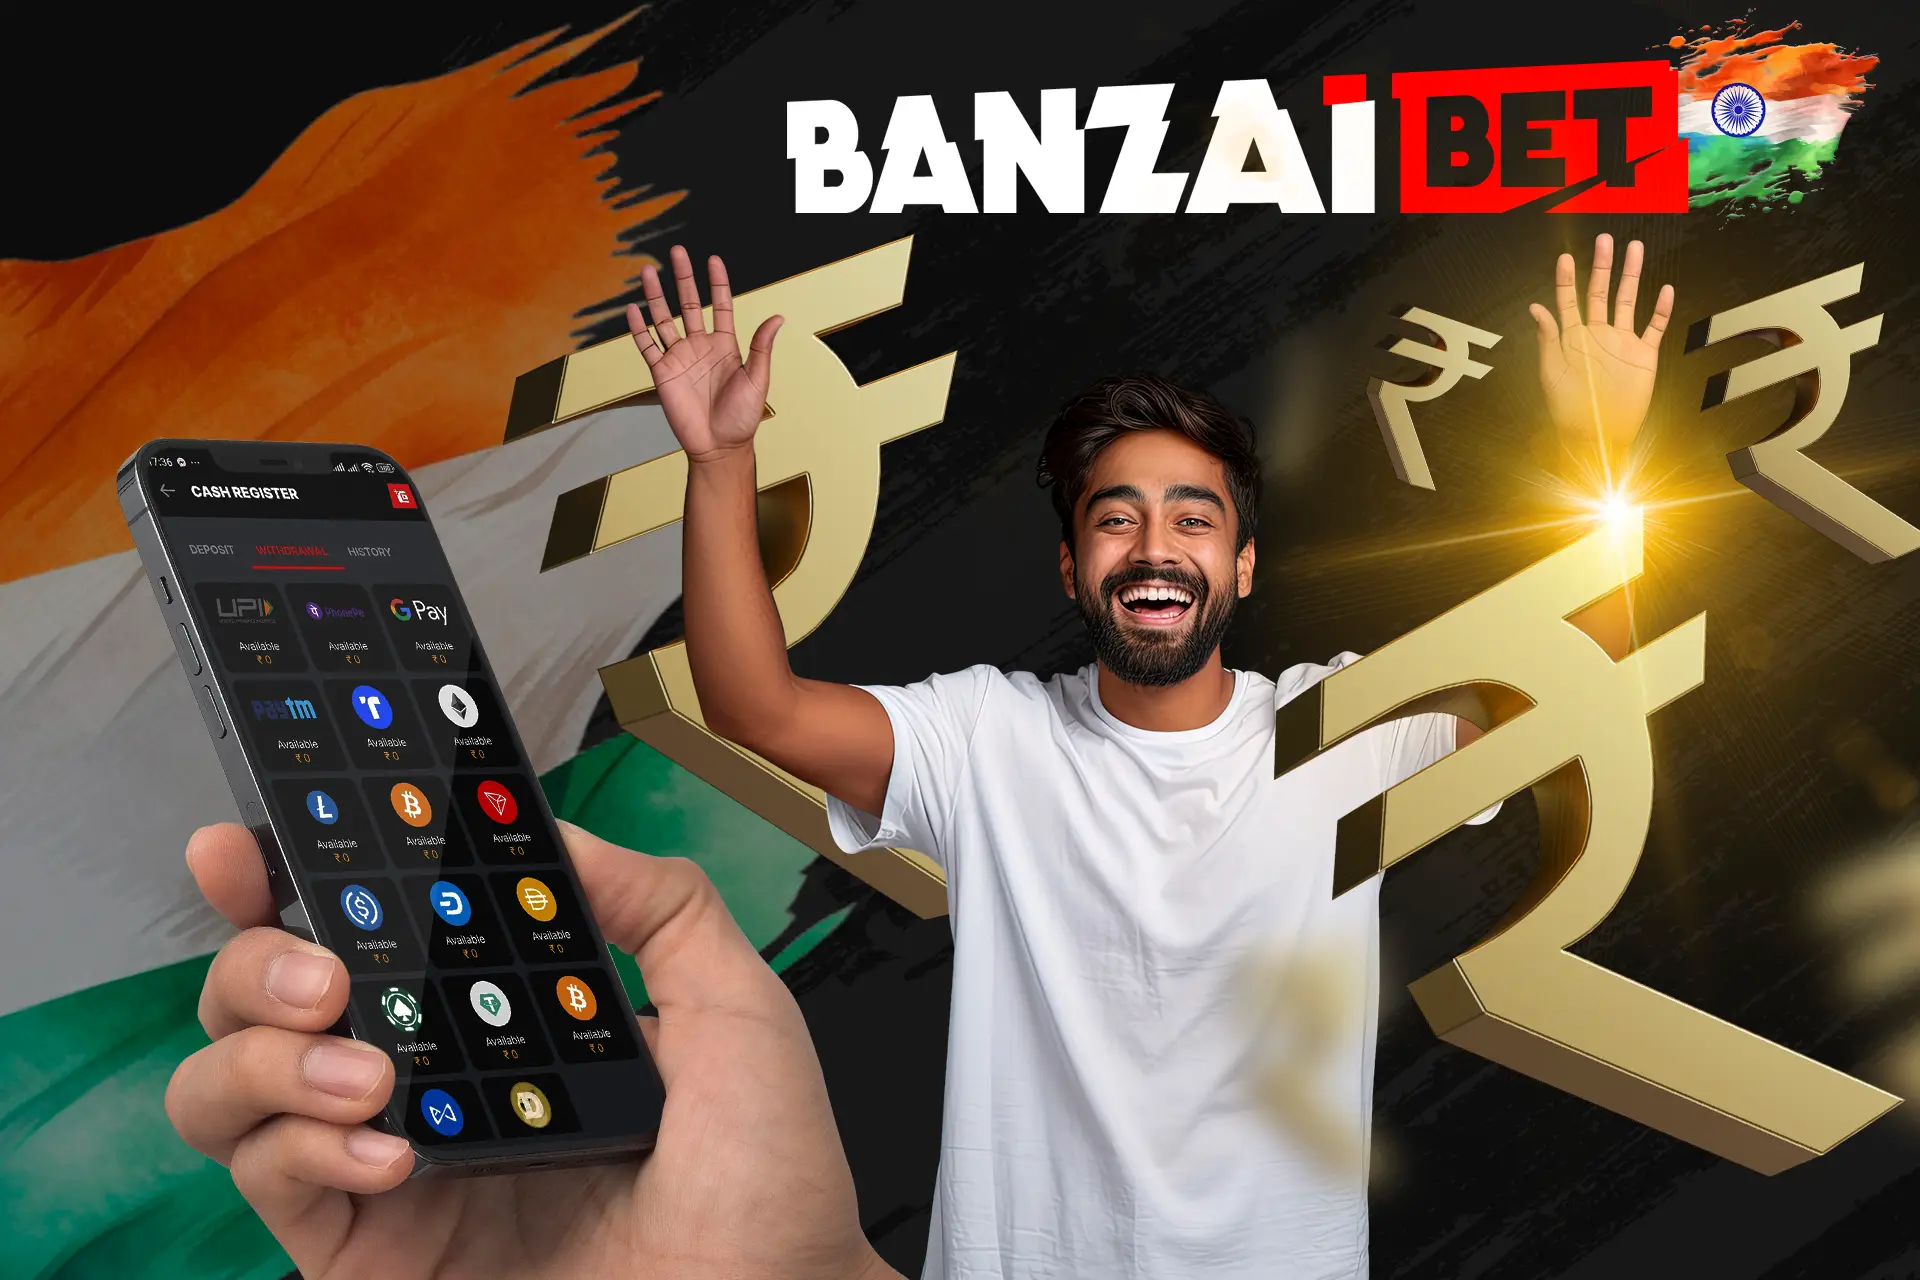 Withdraw your winnings to Banzaibet India